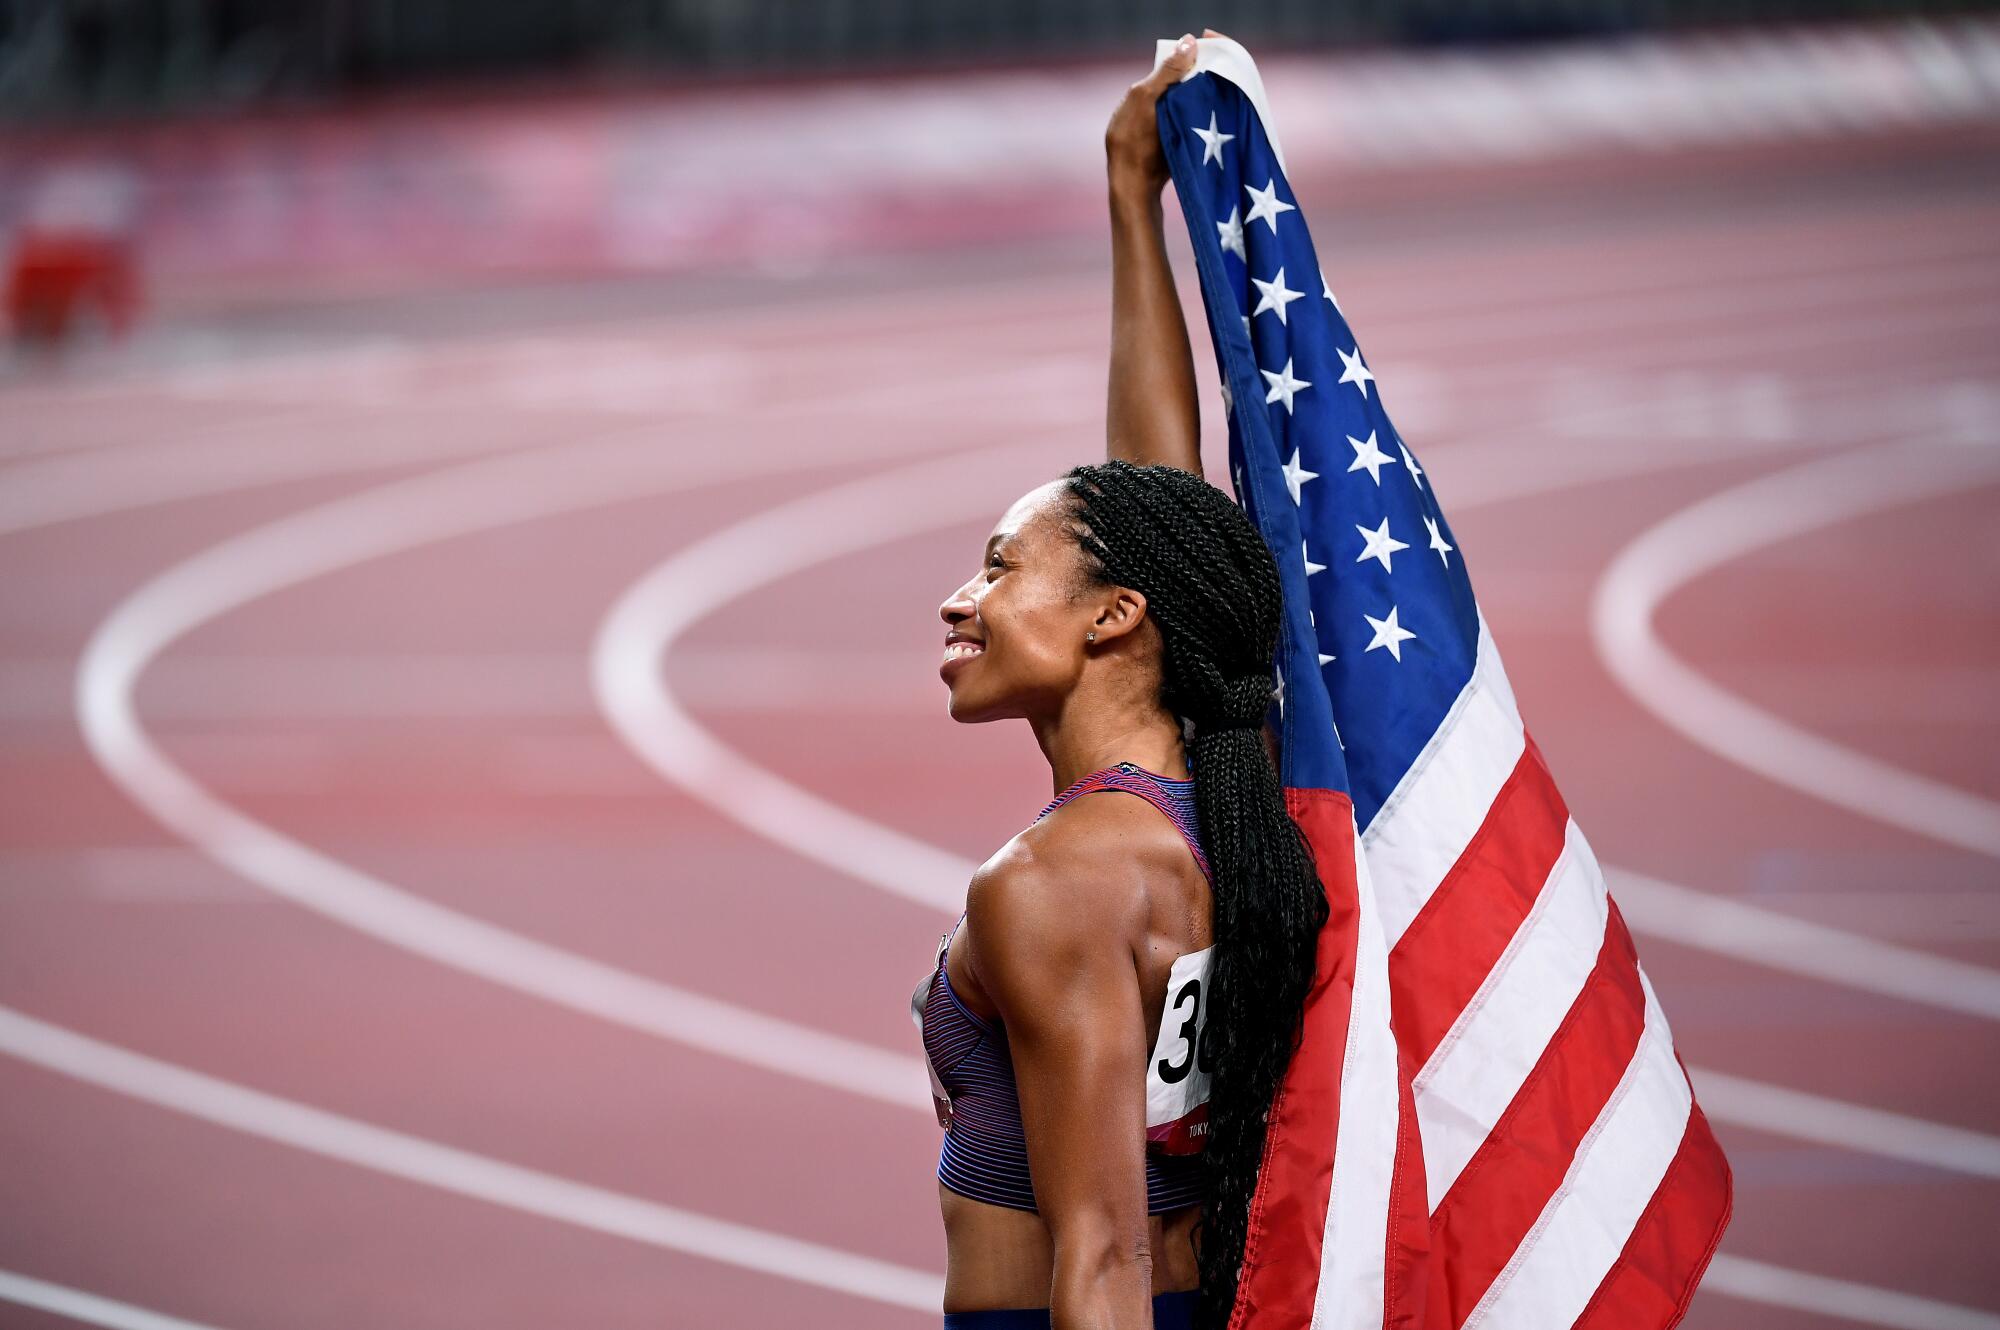 USA's Allyson Felix smiles after winning the bronze medal in the 400.